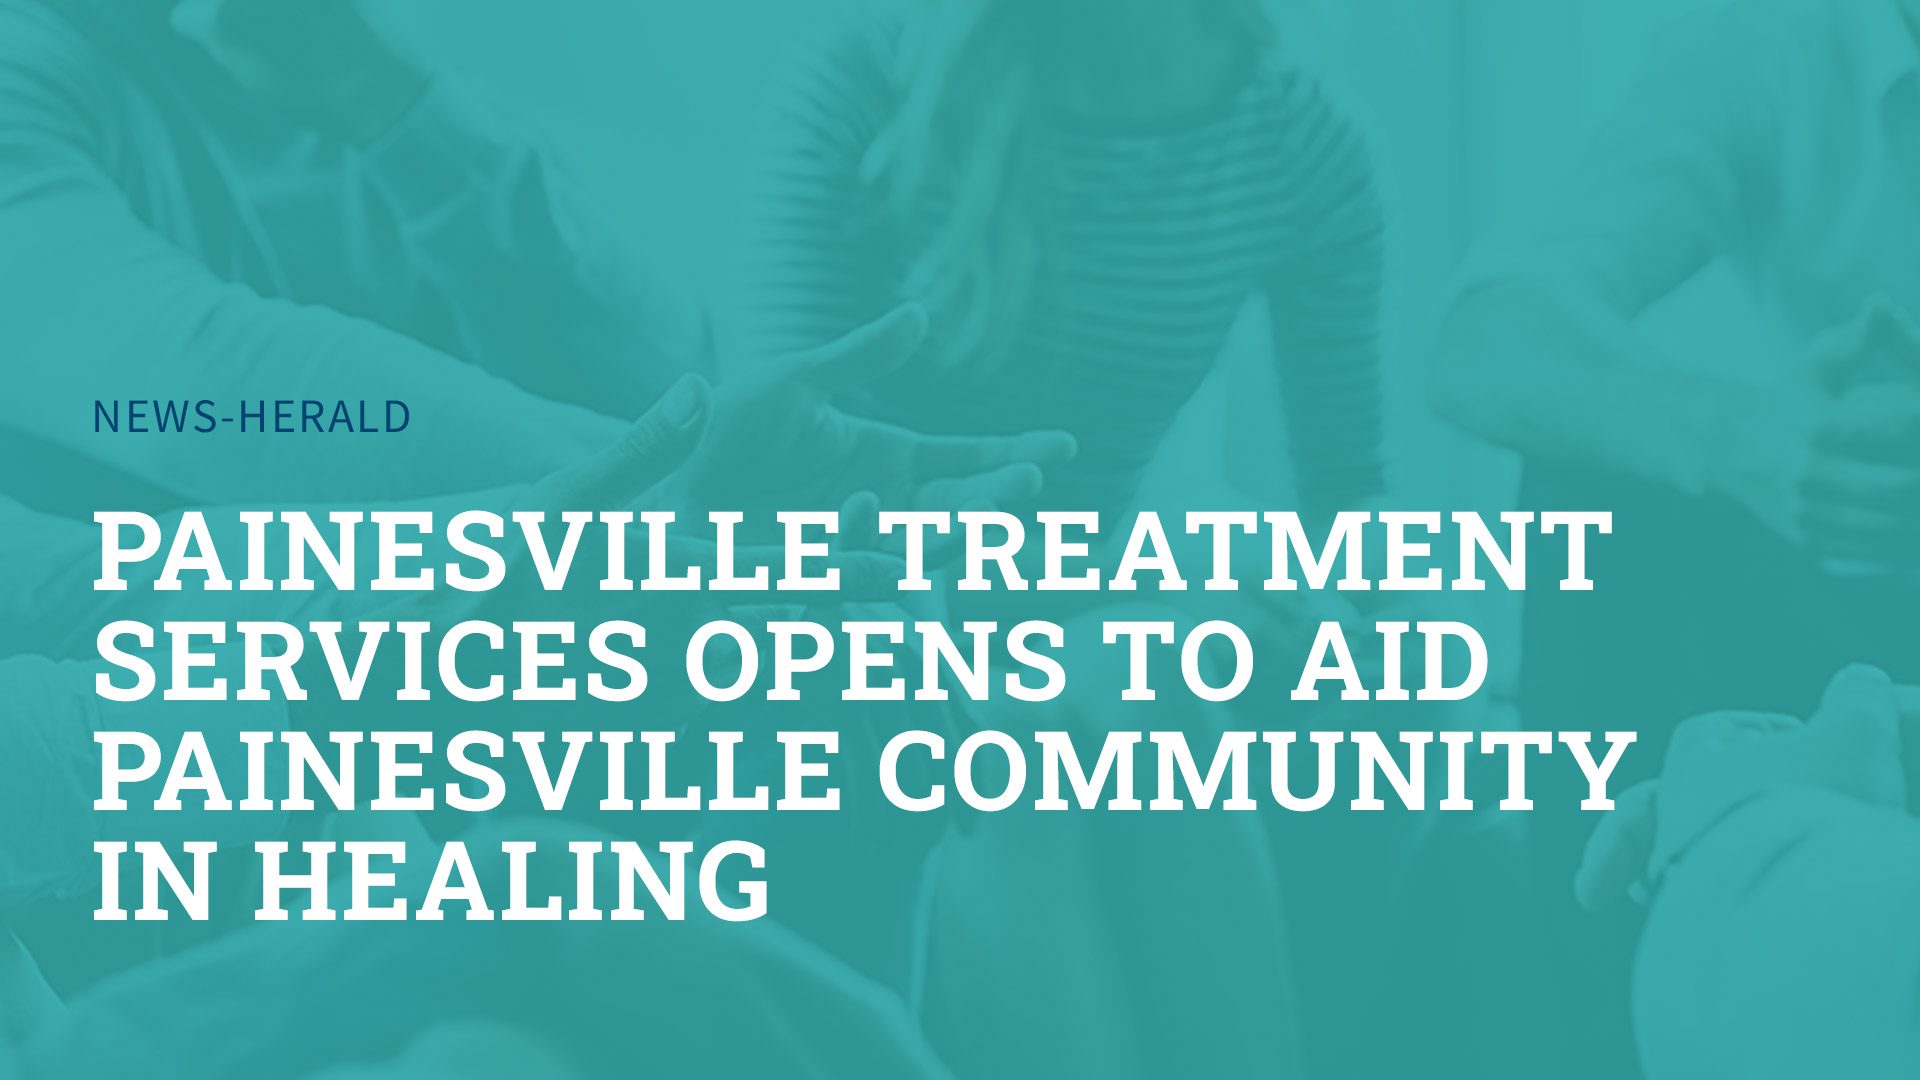 Painesville Treatment Services opens to aid Painesville community in healing